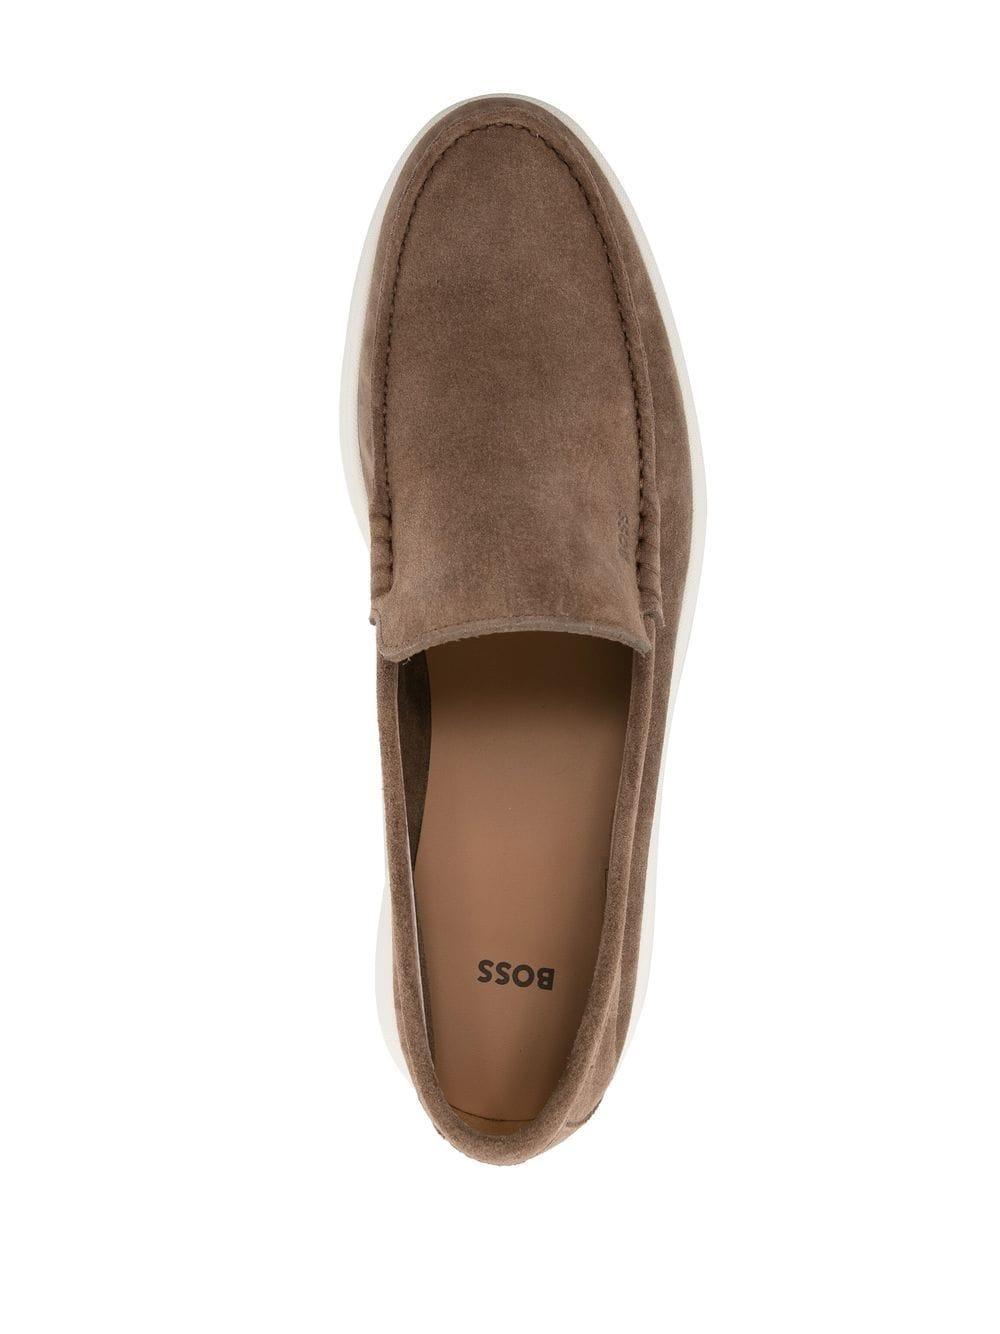 BOSS by HUGO BOSS Slip-on Suede Loafers in Brown for Men | Lyst